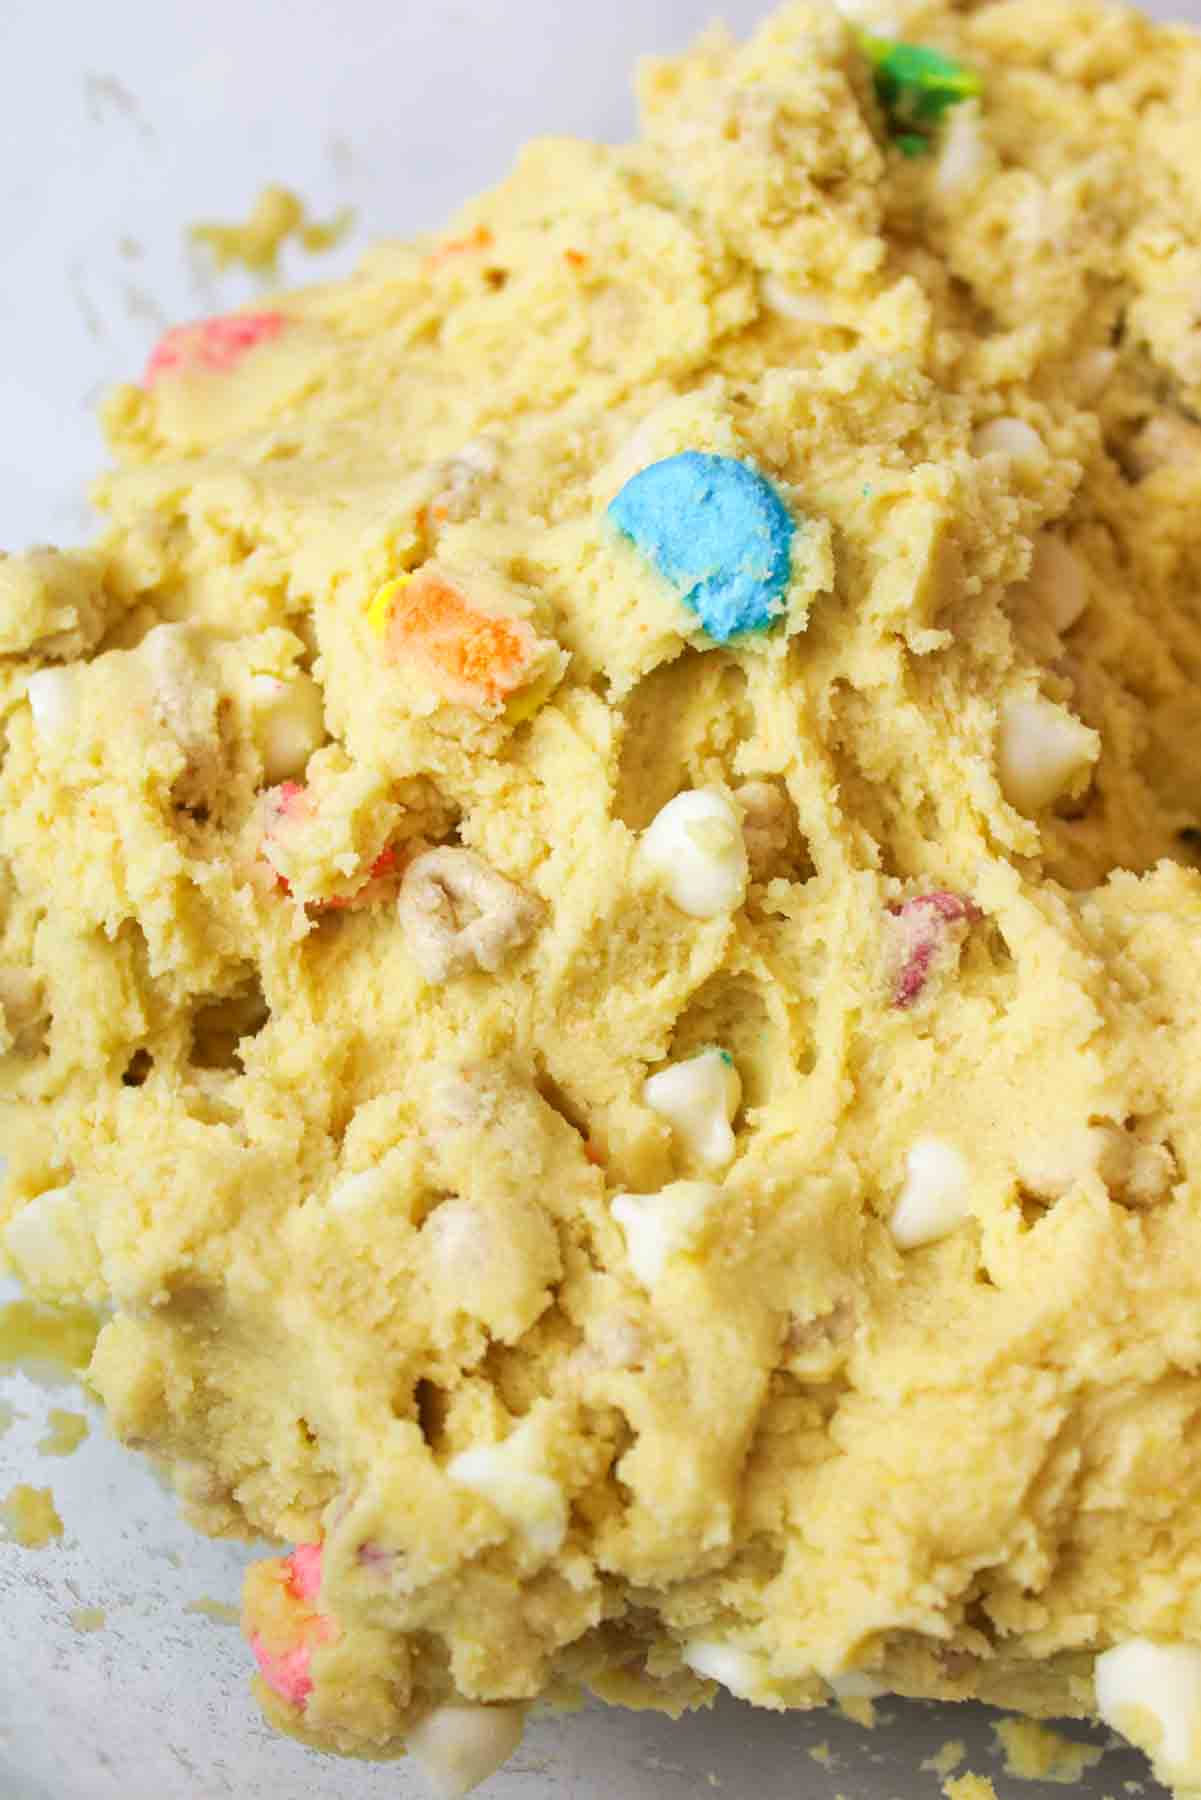 a close up of cookie dough with lucky charms and white chocolate chips inside of it.